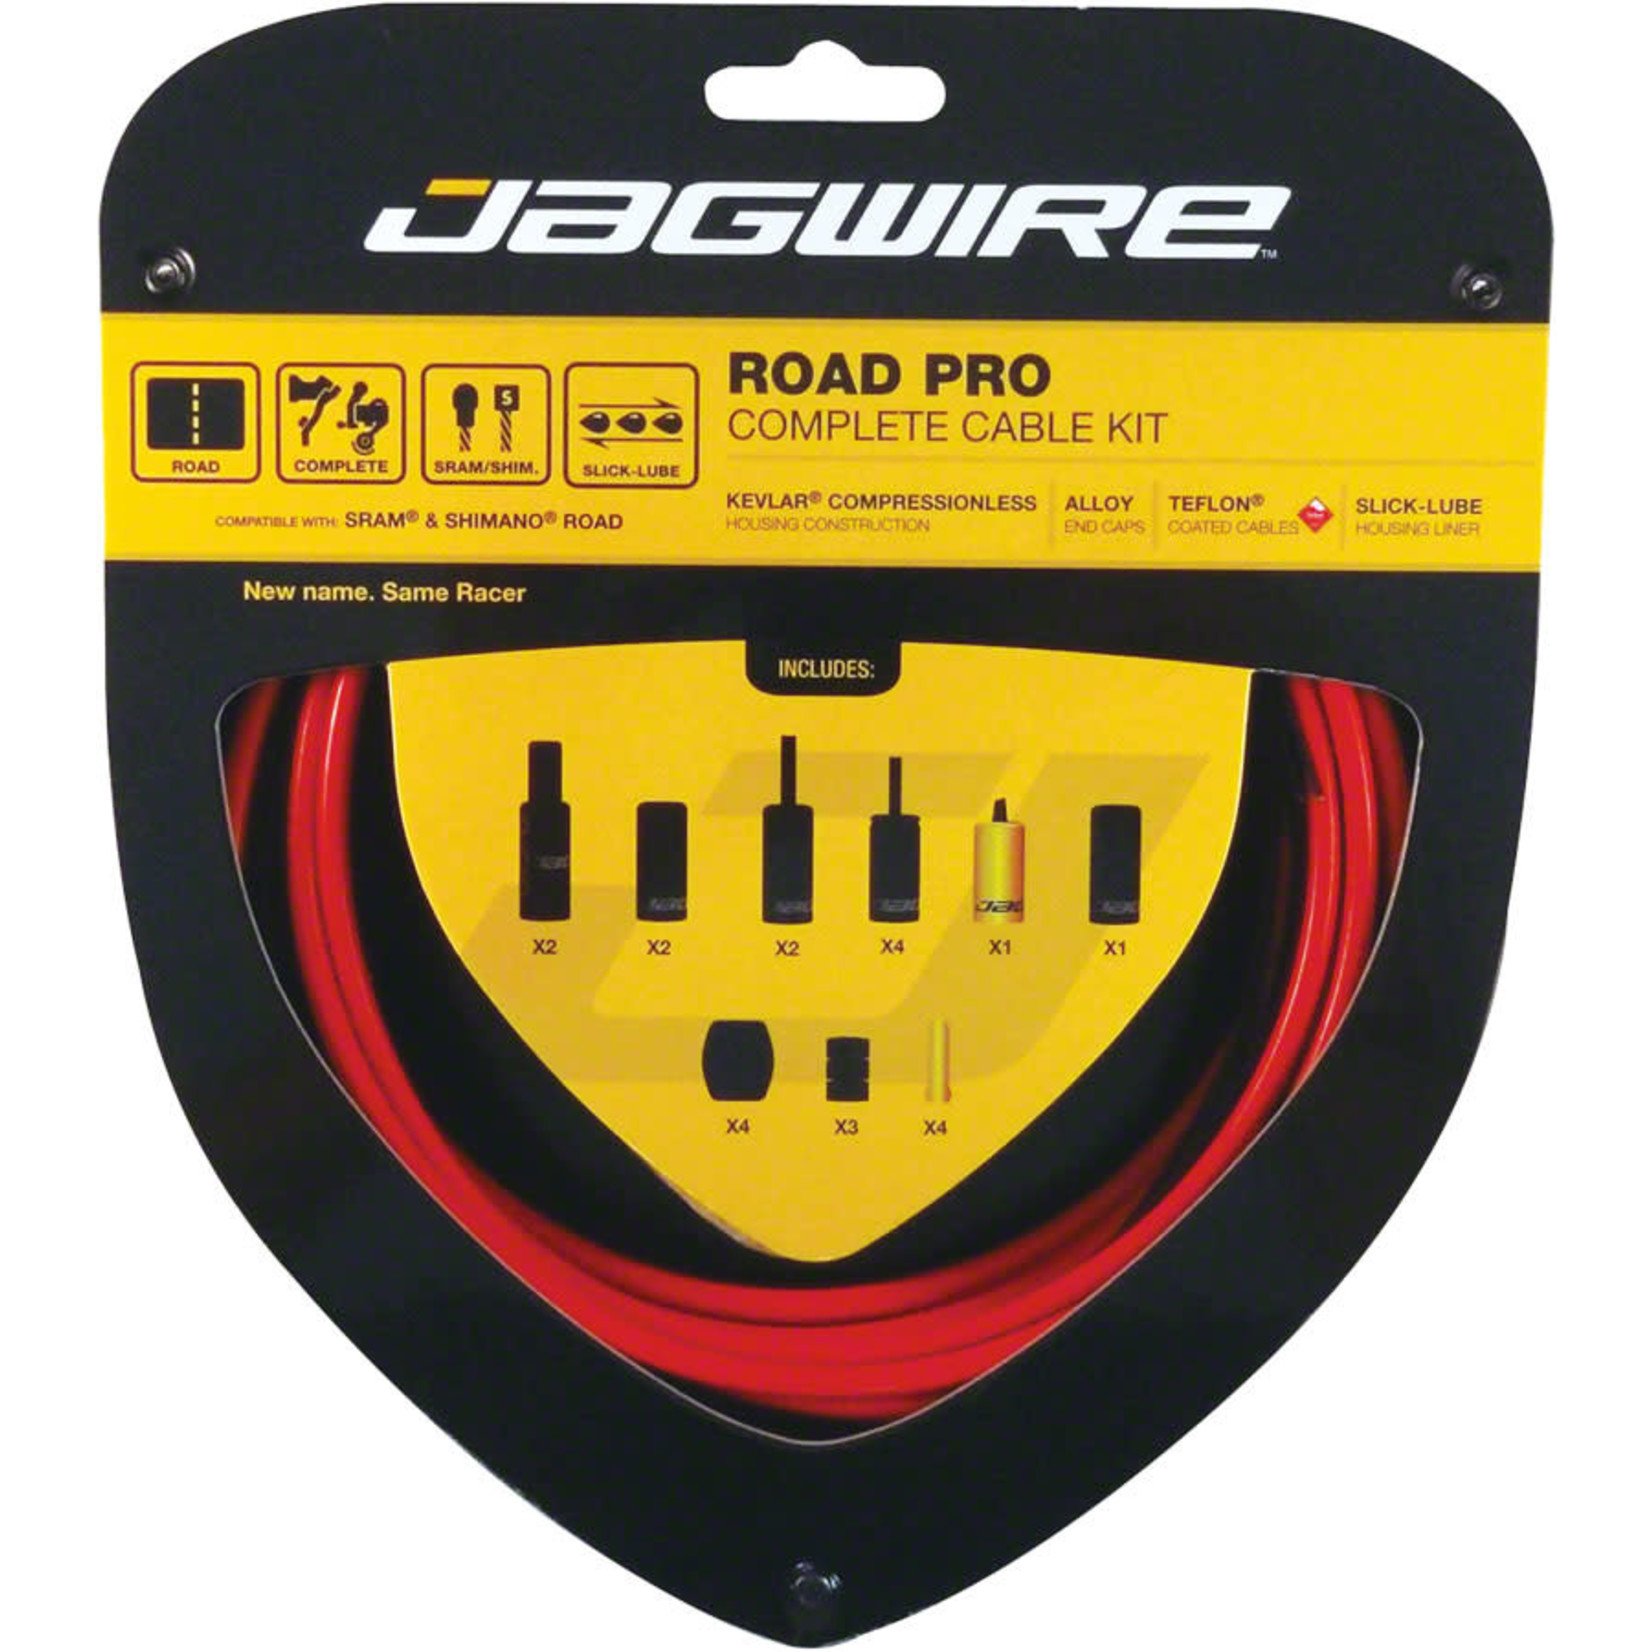 Jagwire Jagwire Racer Complete RoadDIY Kit Red